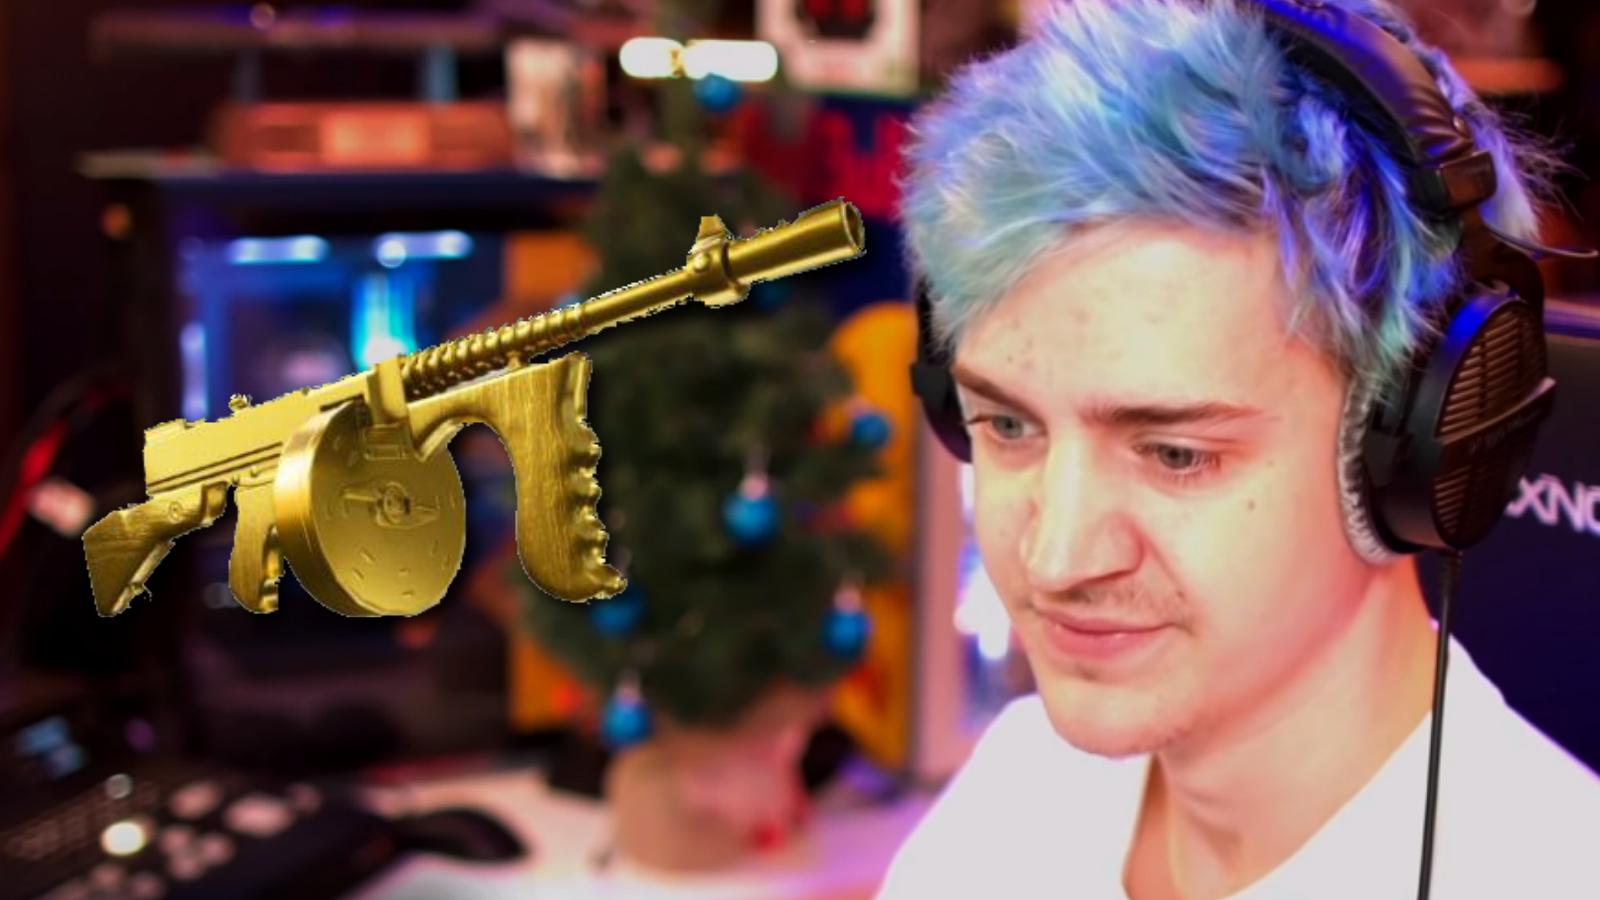 Ninja streaming on mixer with blue hair and fortnite drum gun